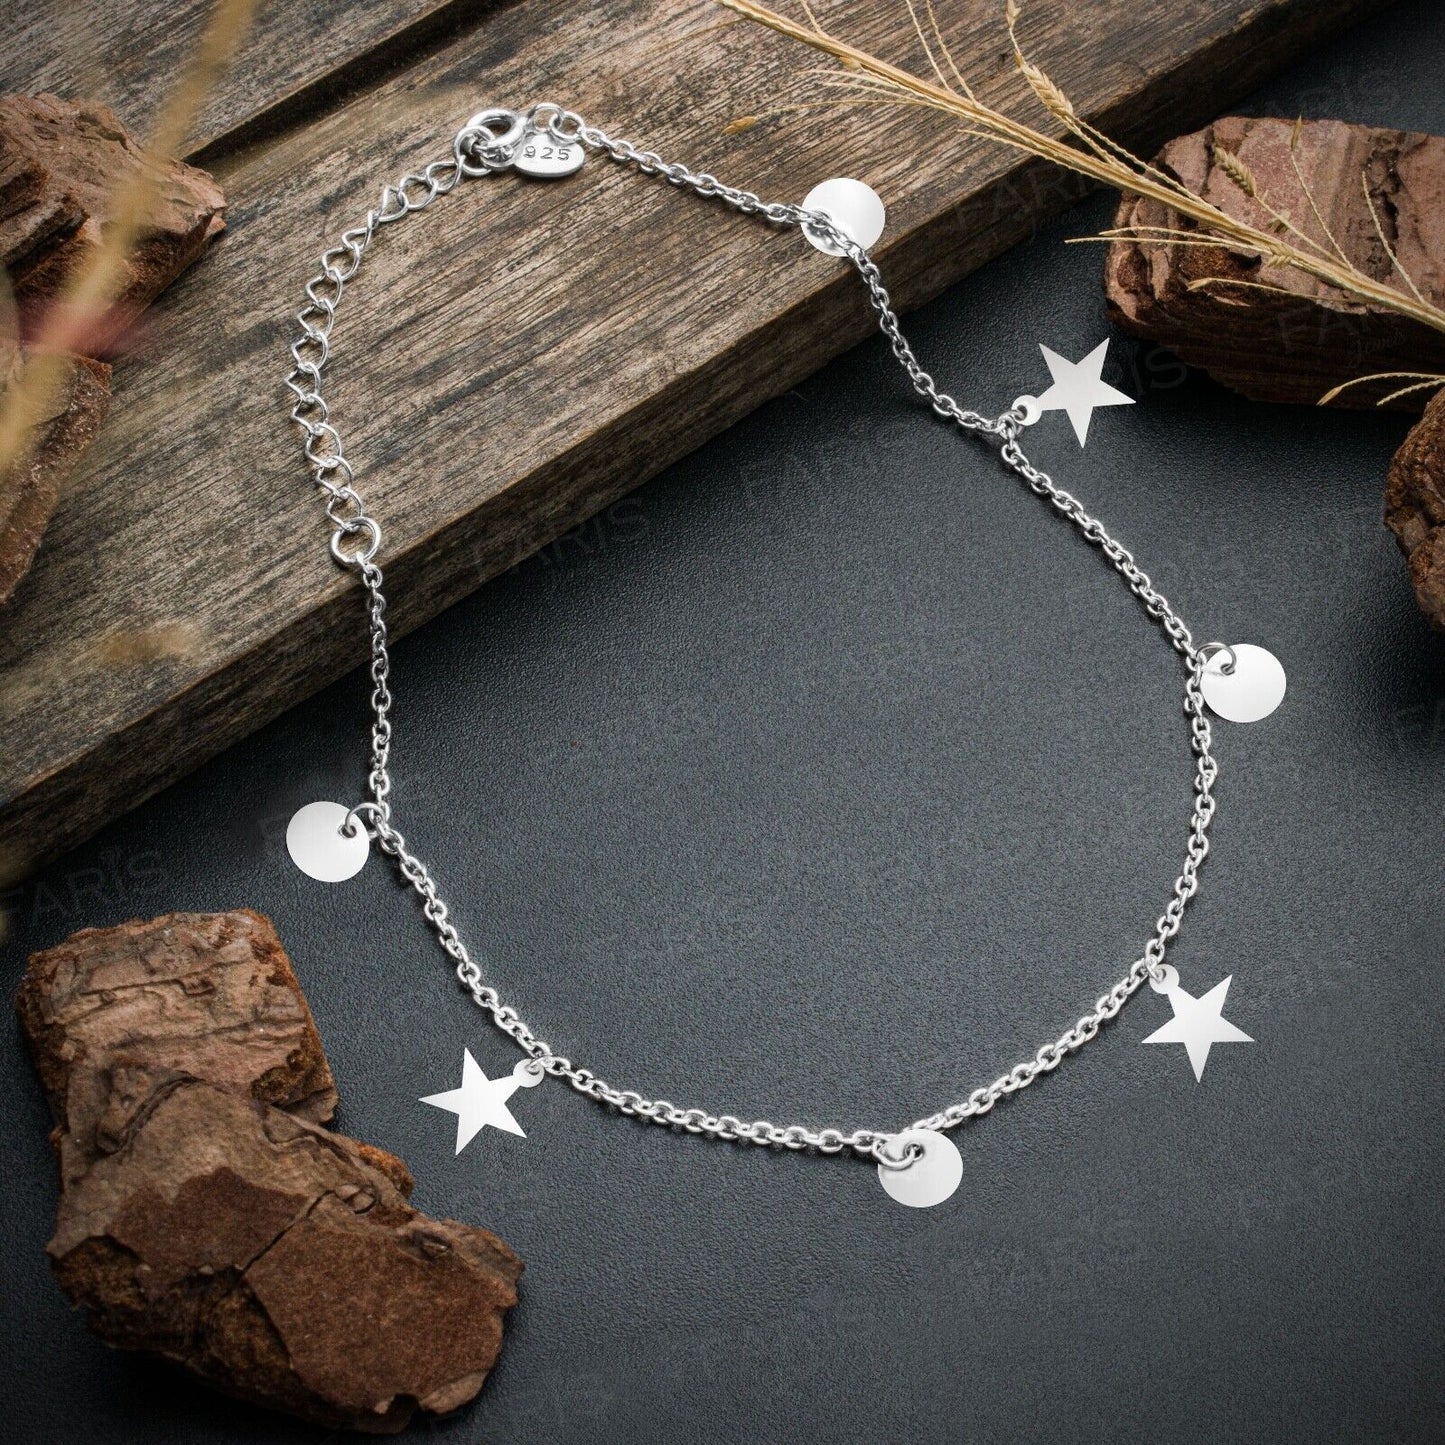 Adjustable Solid 925 Sterling Silver Star Charm Anklet Ladies Jewellery Gift - Faris Jewels